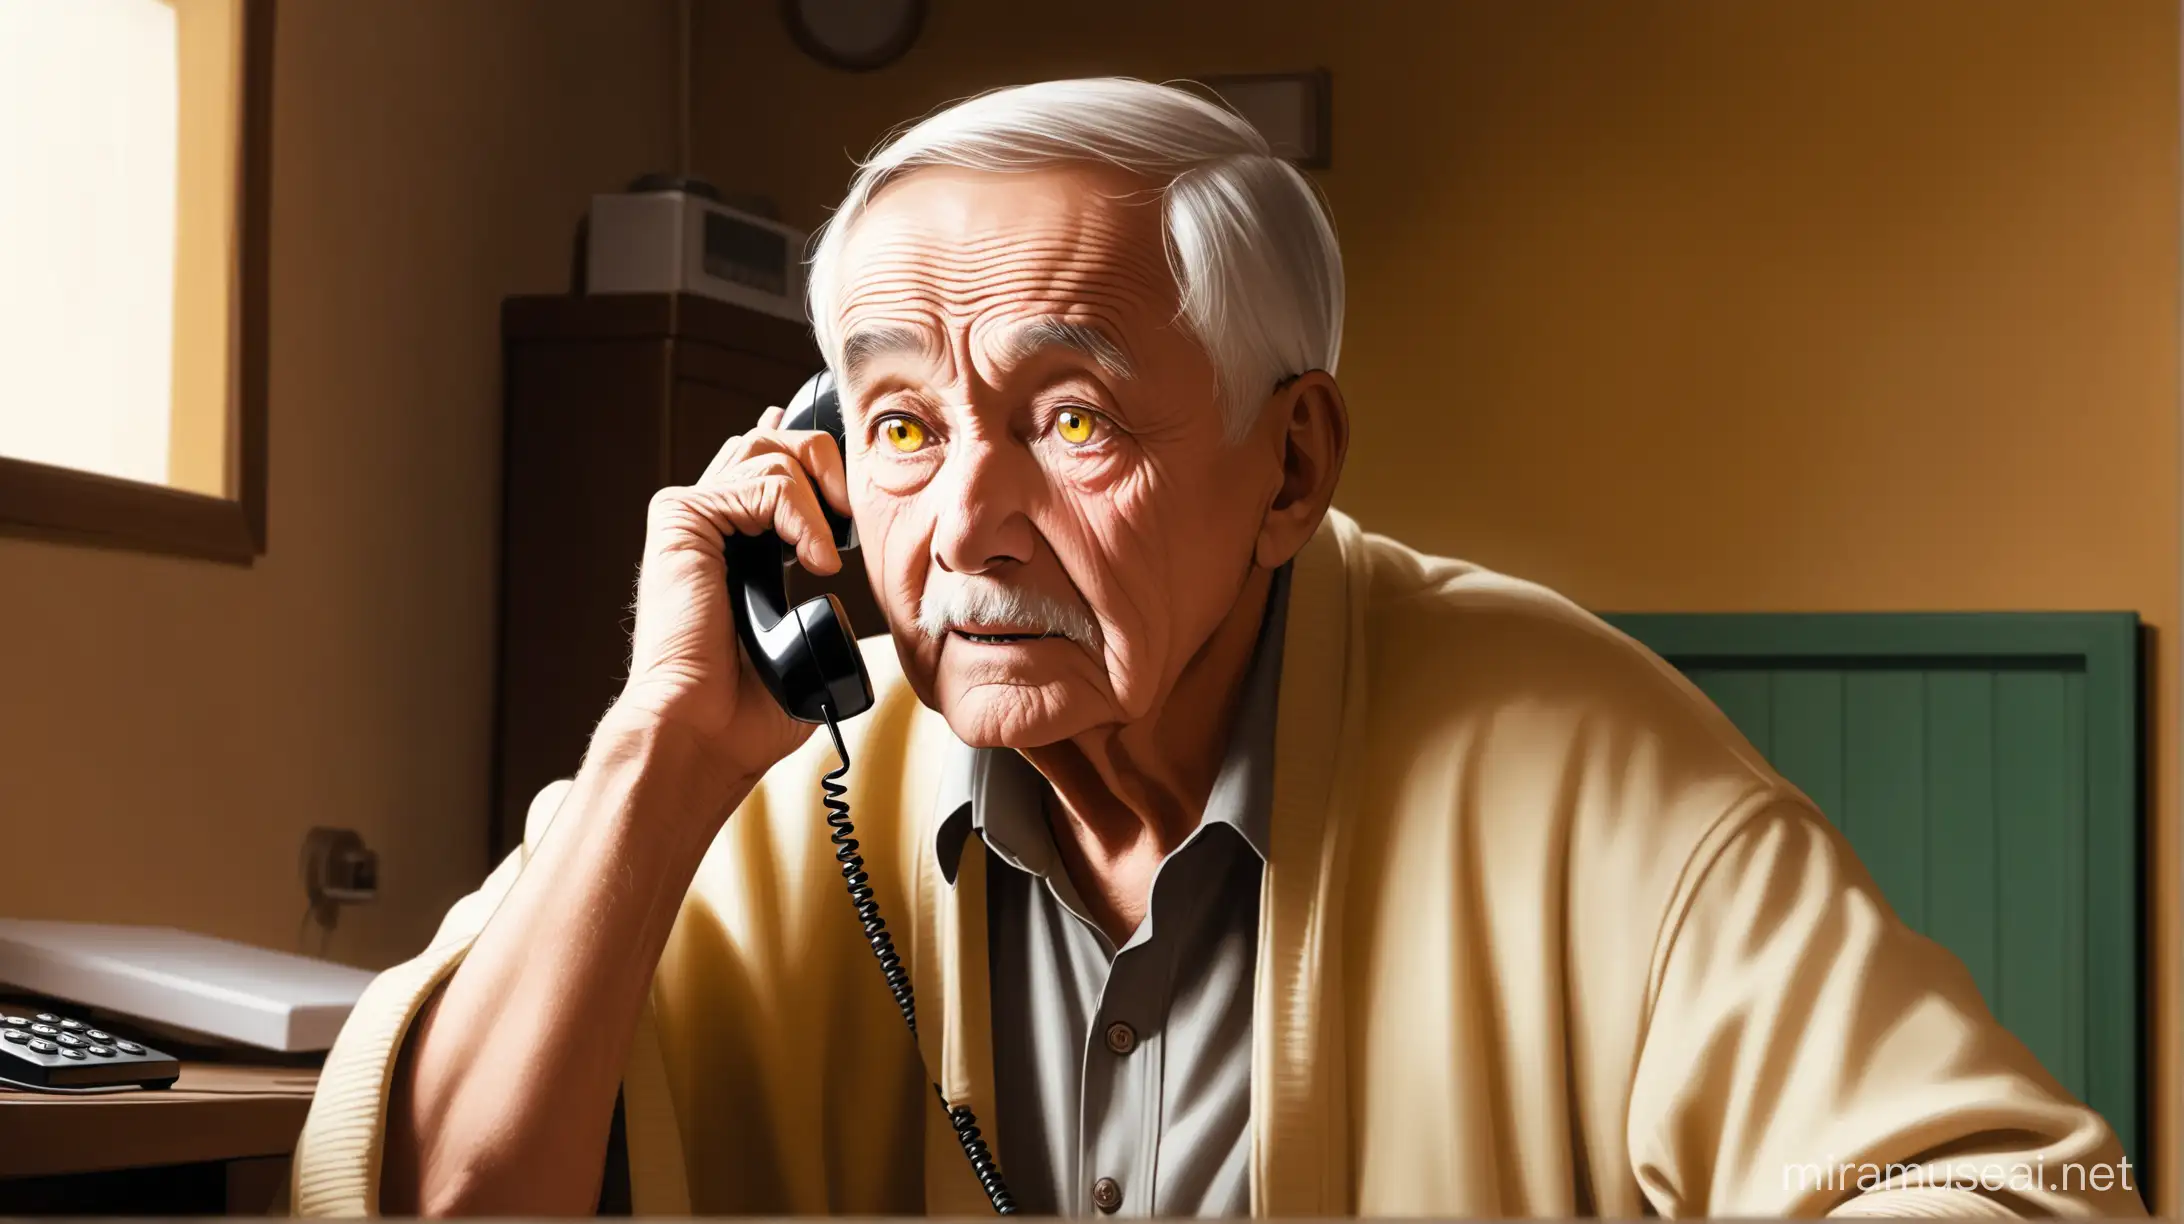 Elderly Man with Yellowish Eyes Talking on the Phone in His Cozy Home